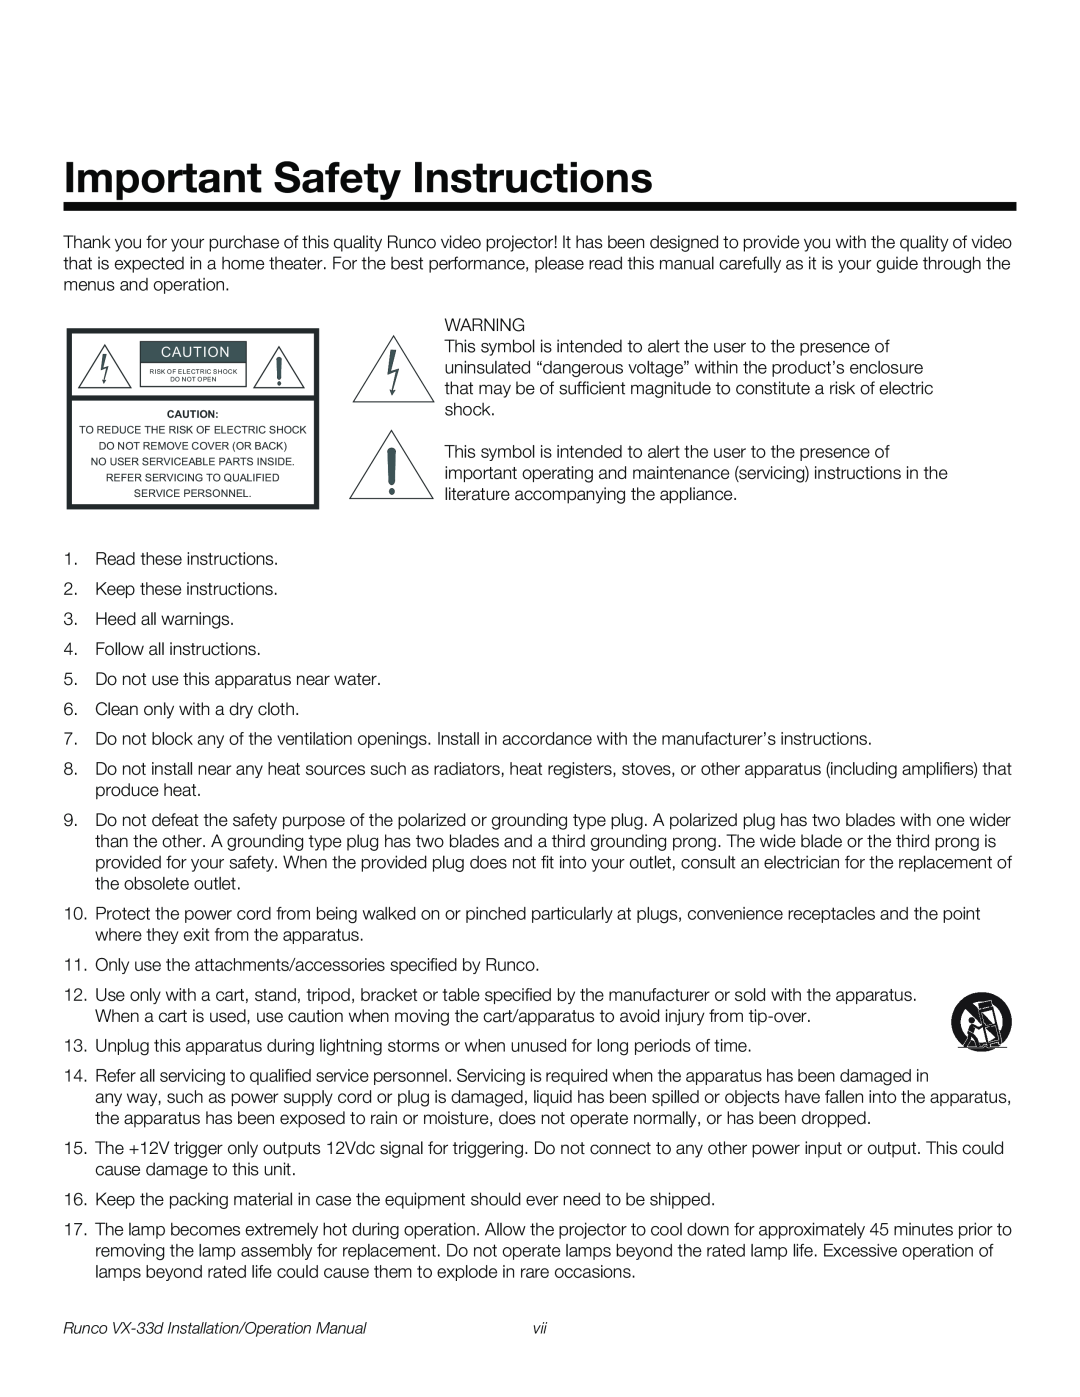 Runco VX-33D operation manual Important Safety Instructions 